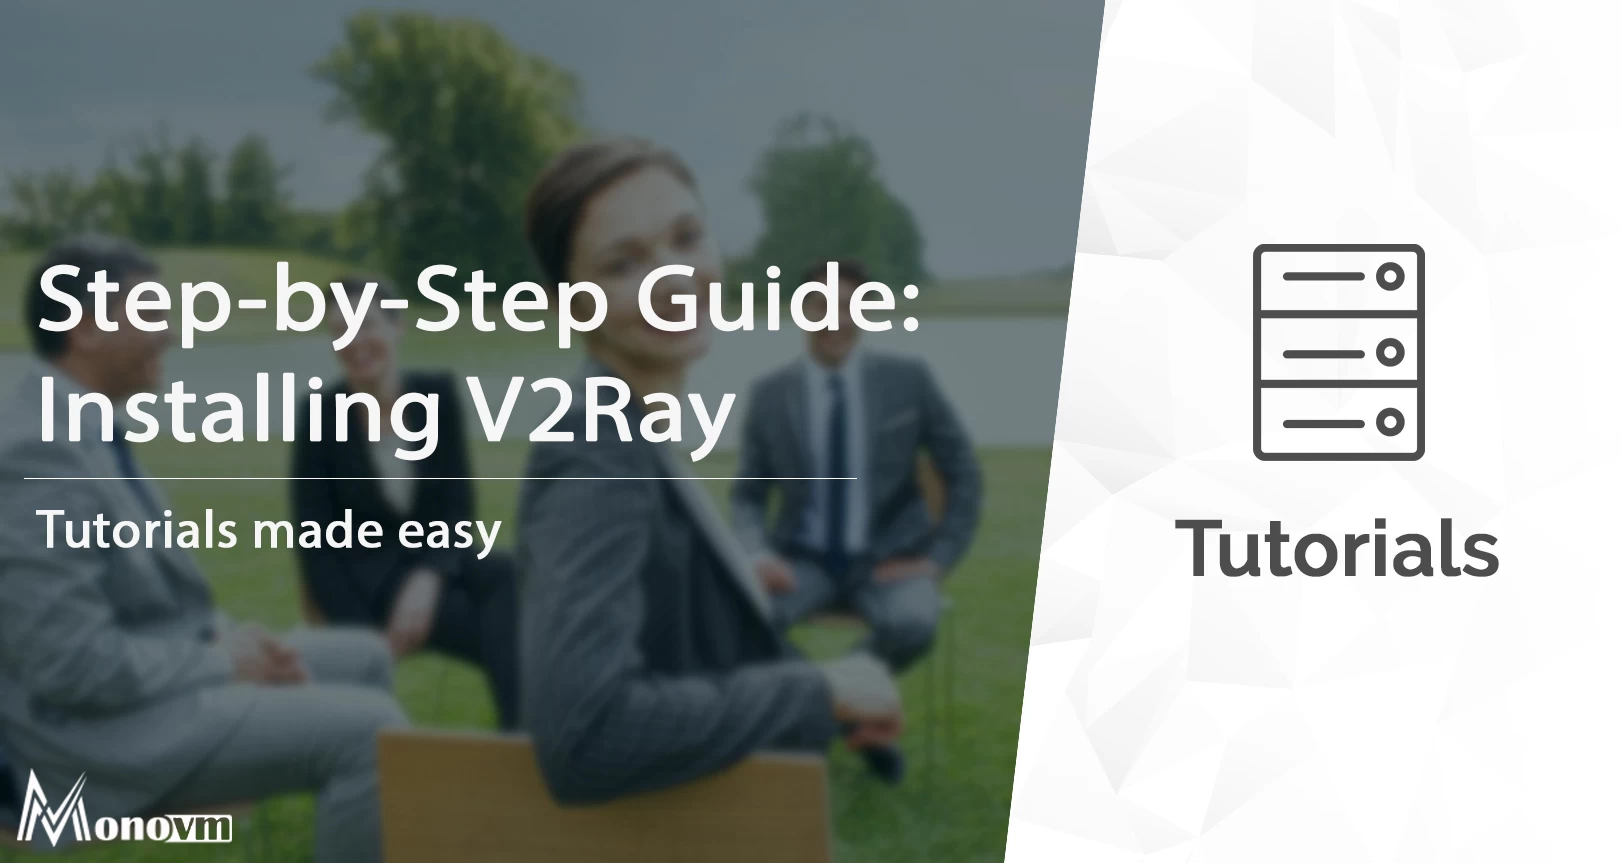 Step-by-Step Guide: Installing V2Ray